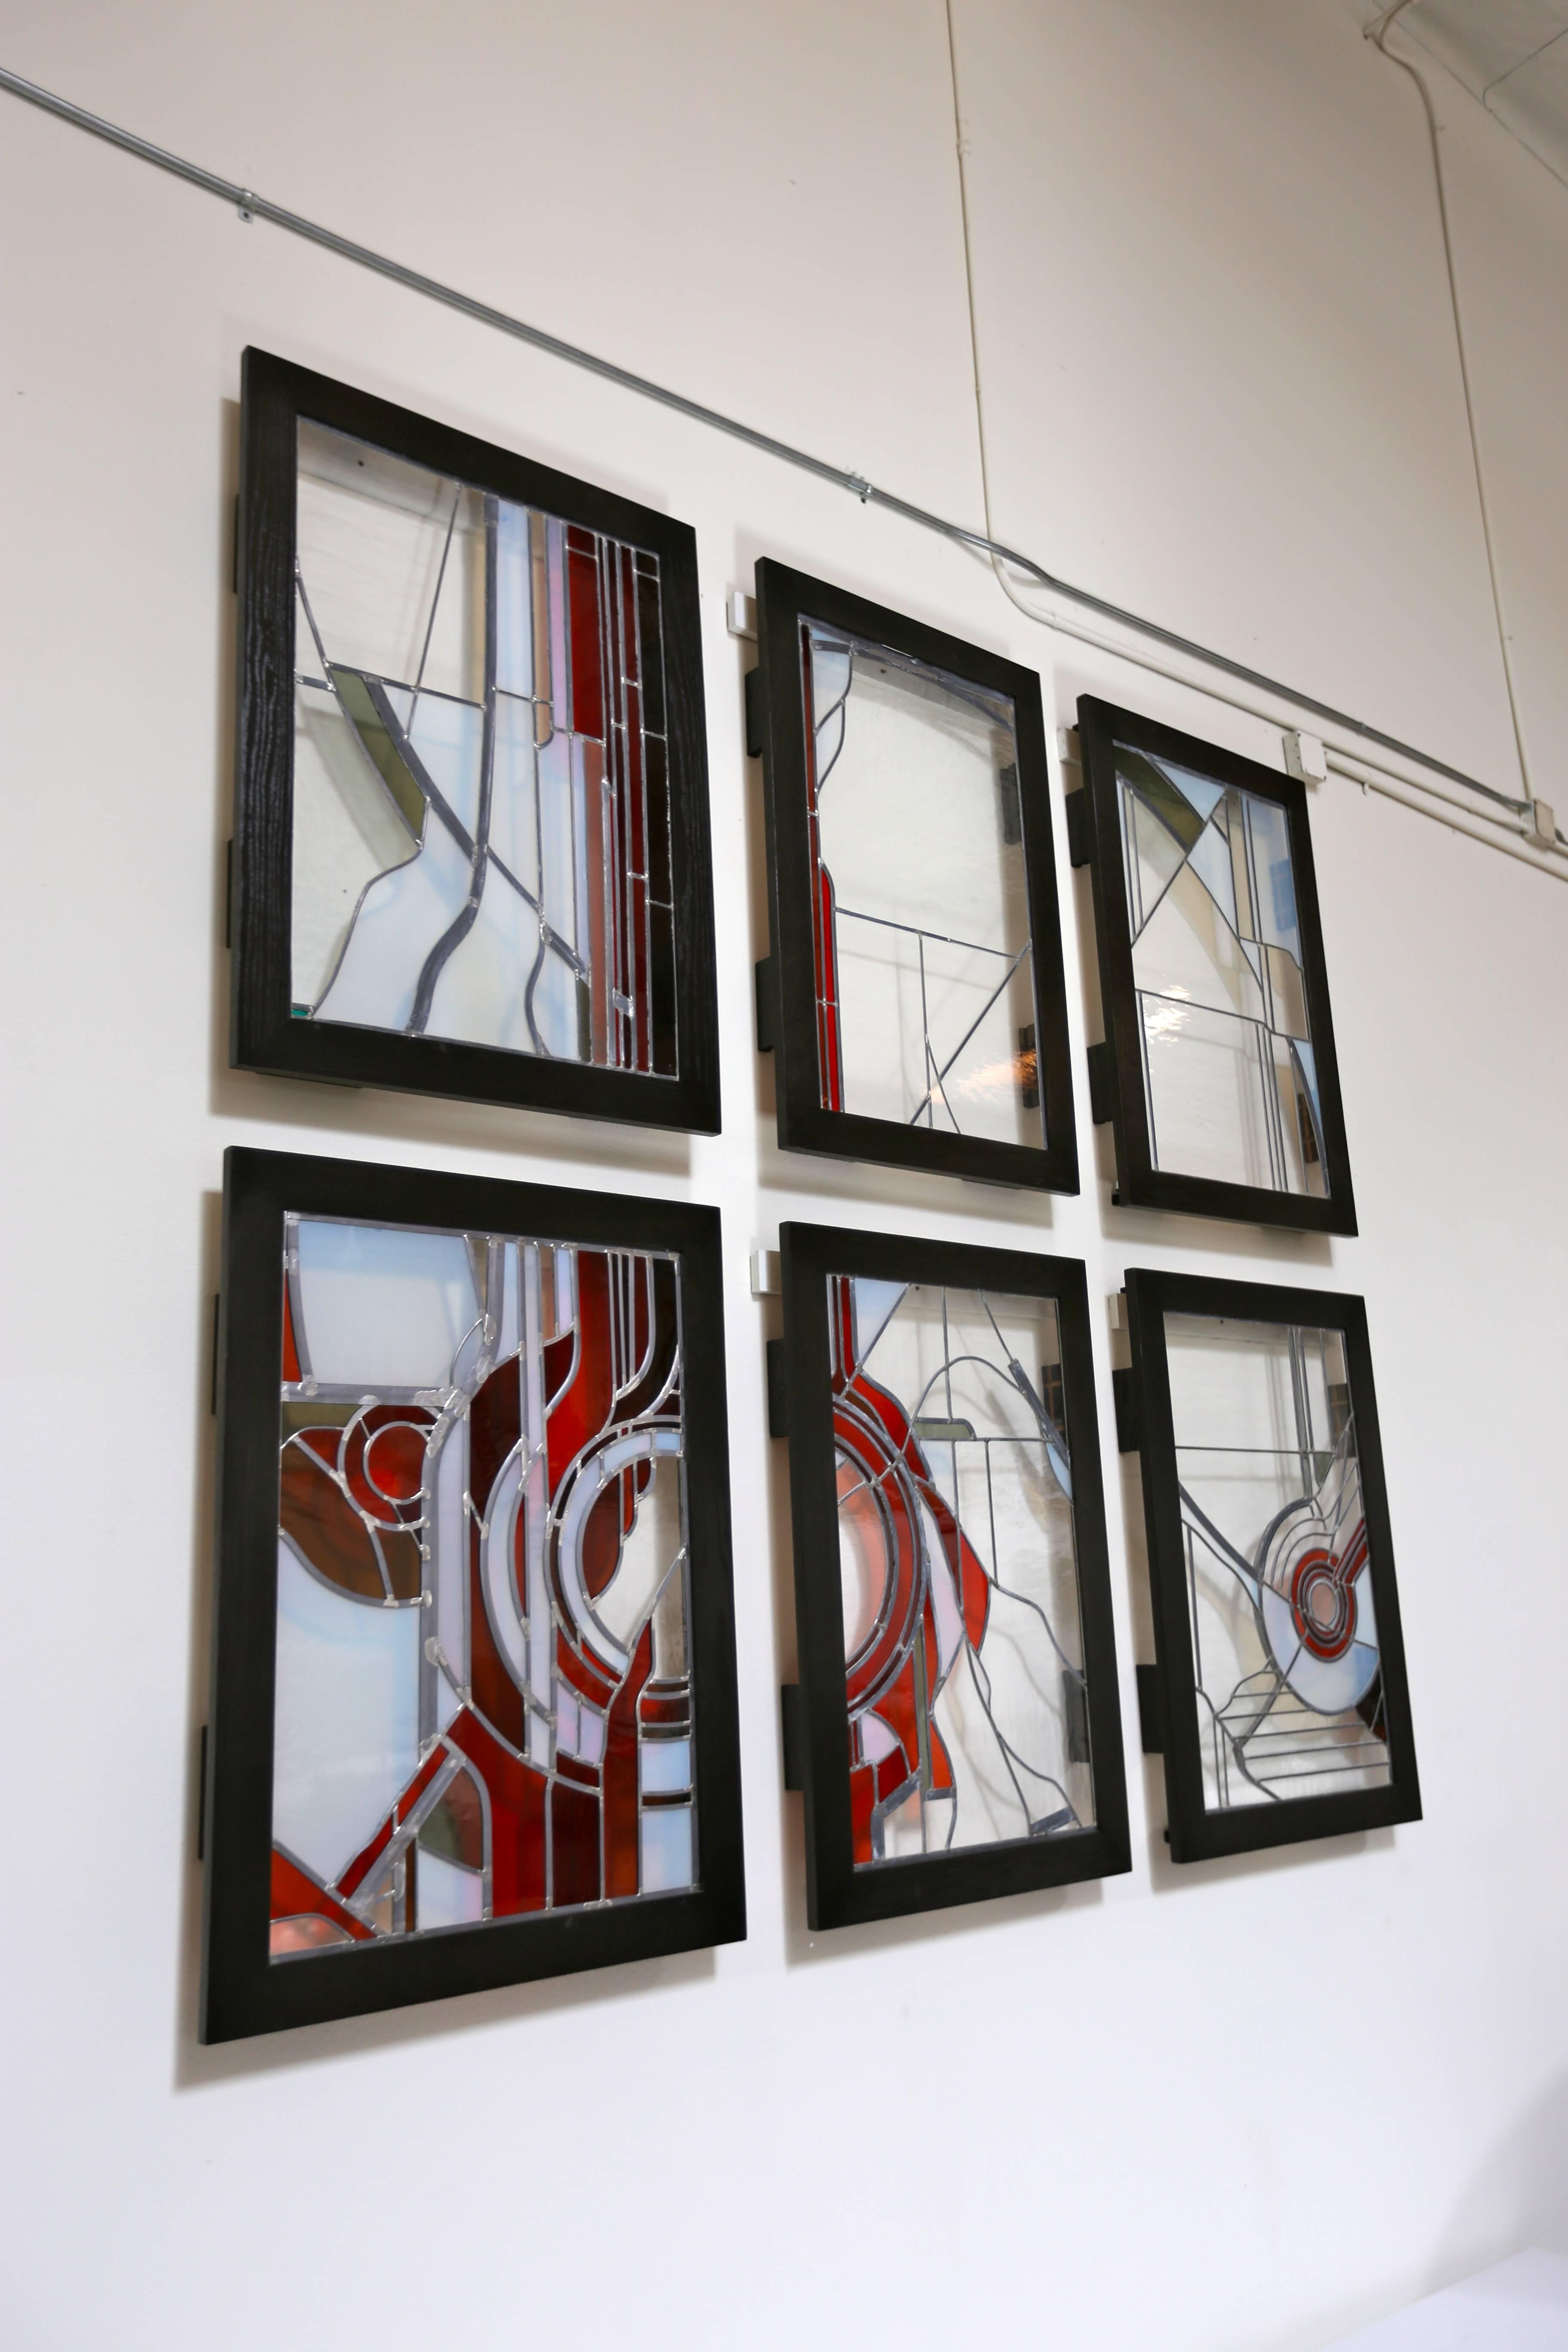 Studio Crafted stained glass abstraction. These pieces have been custom framed for display. 

Two panels measure: 30.5" wide x 41" tall x 3.5" deep.

Two panels measure: 27.25" wide x 41" tall x 3.5" deep. 

Two